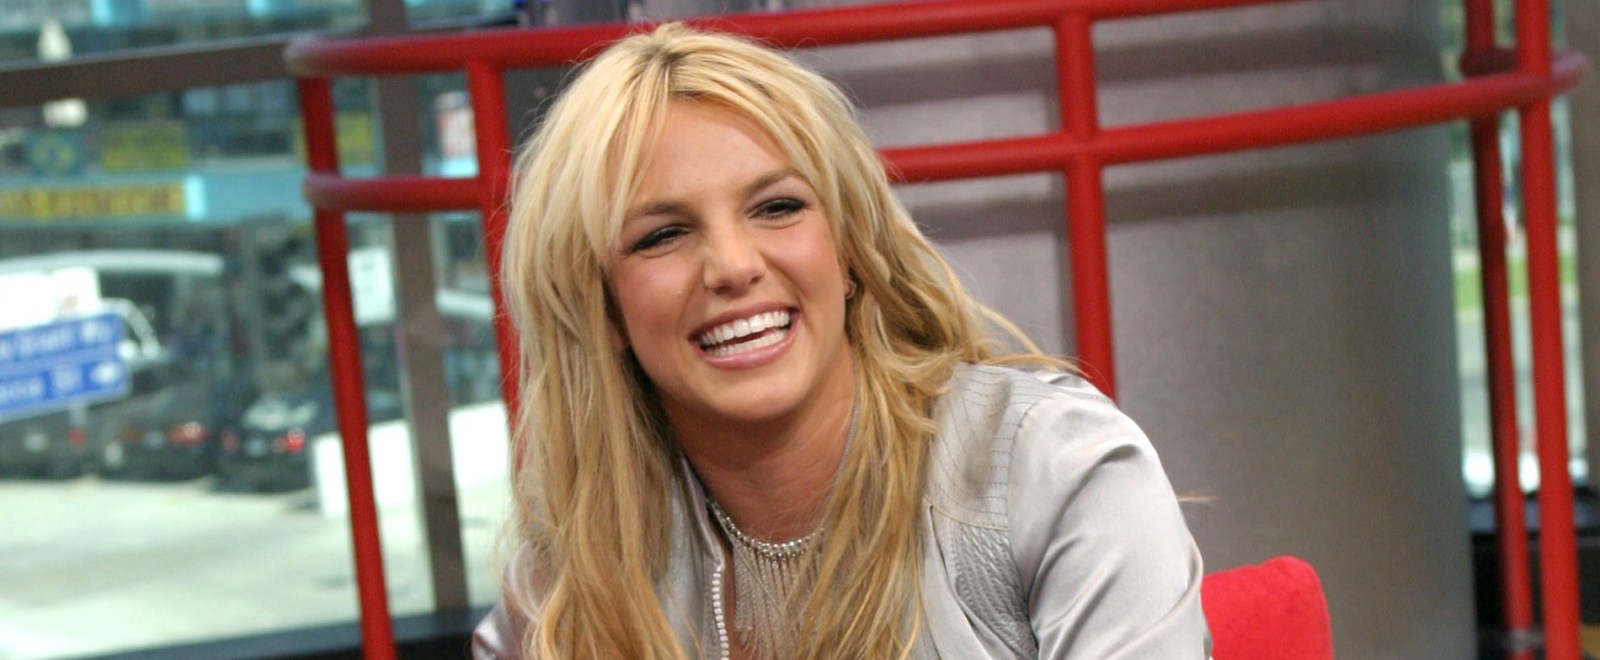 Britney Spears Gives A Bizarre PSA About Her Five Beach Day Essentials